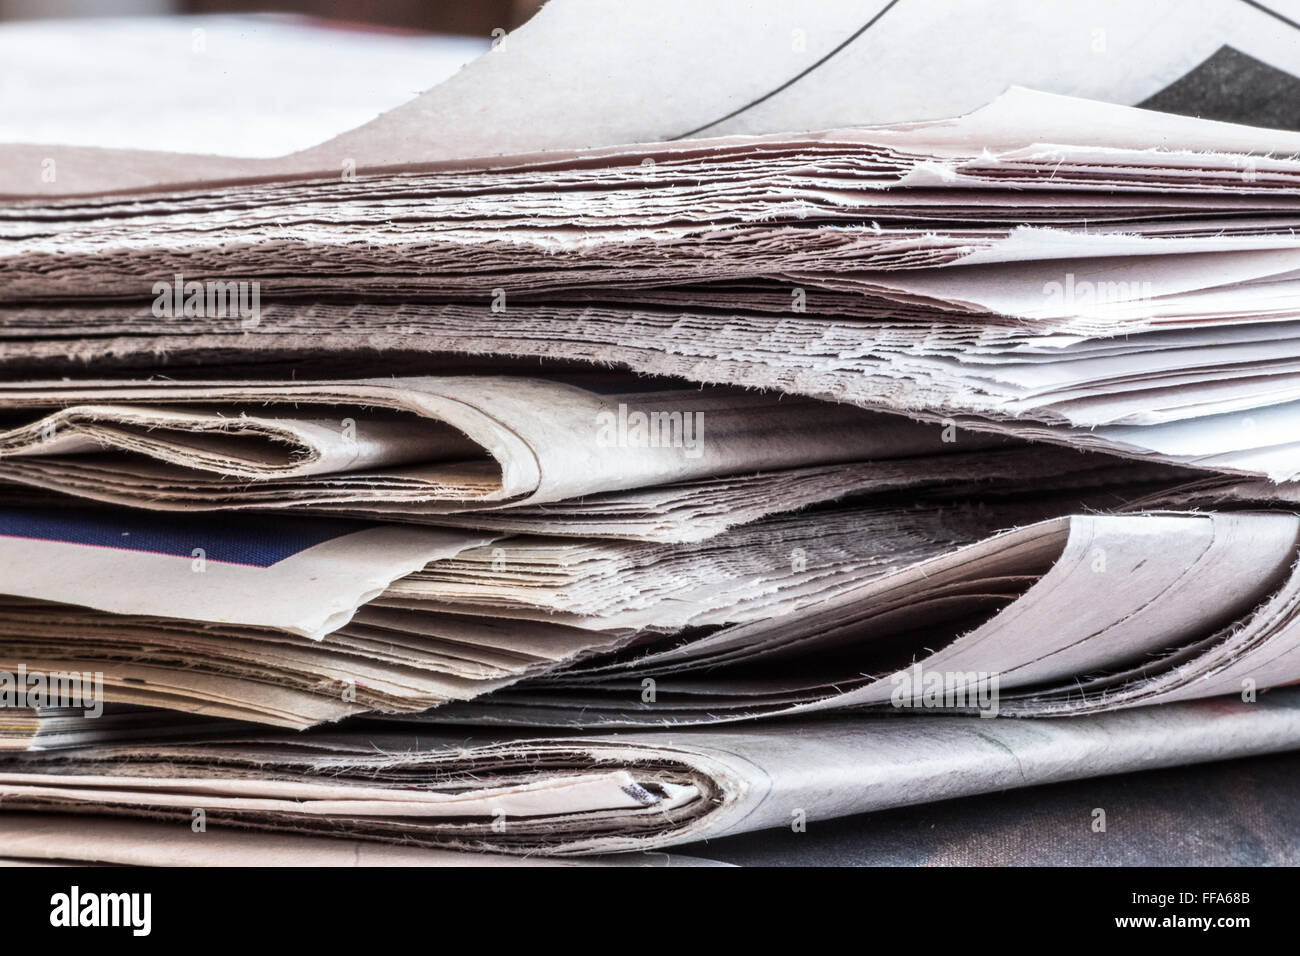 Extreme closeup of stack of newspapers Stock Photo